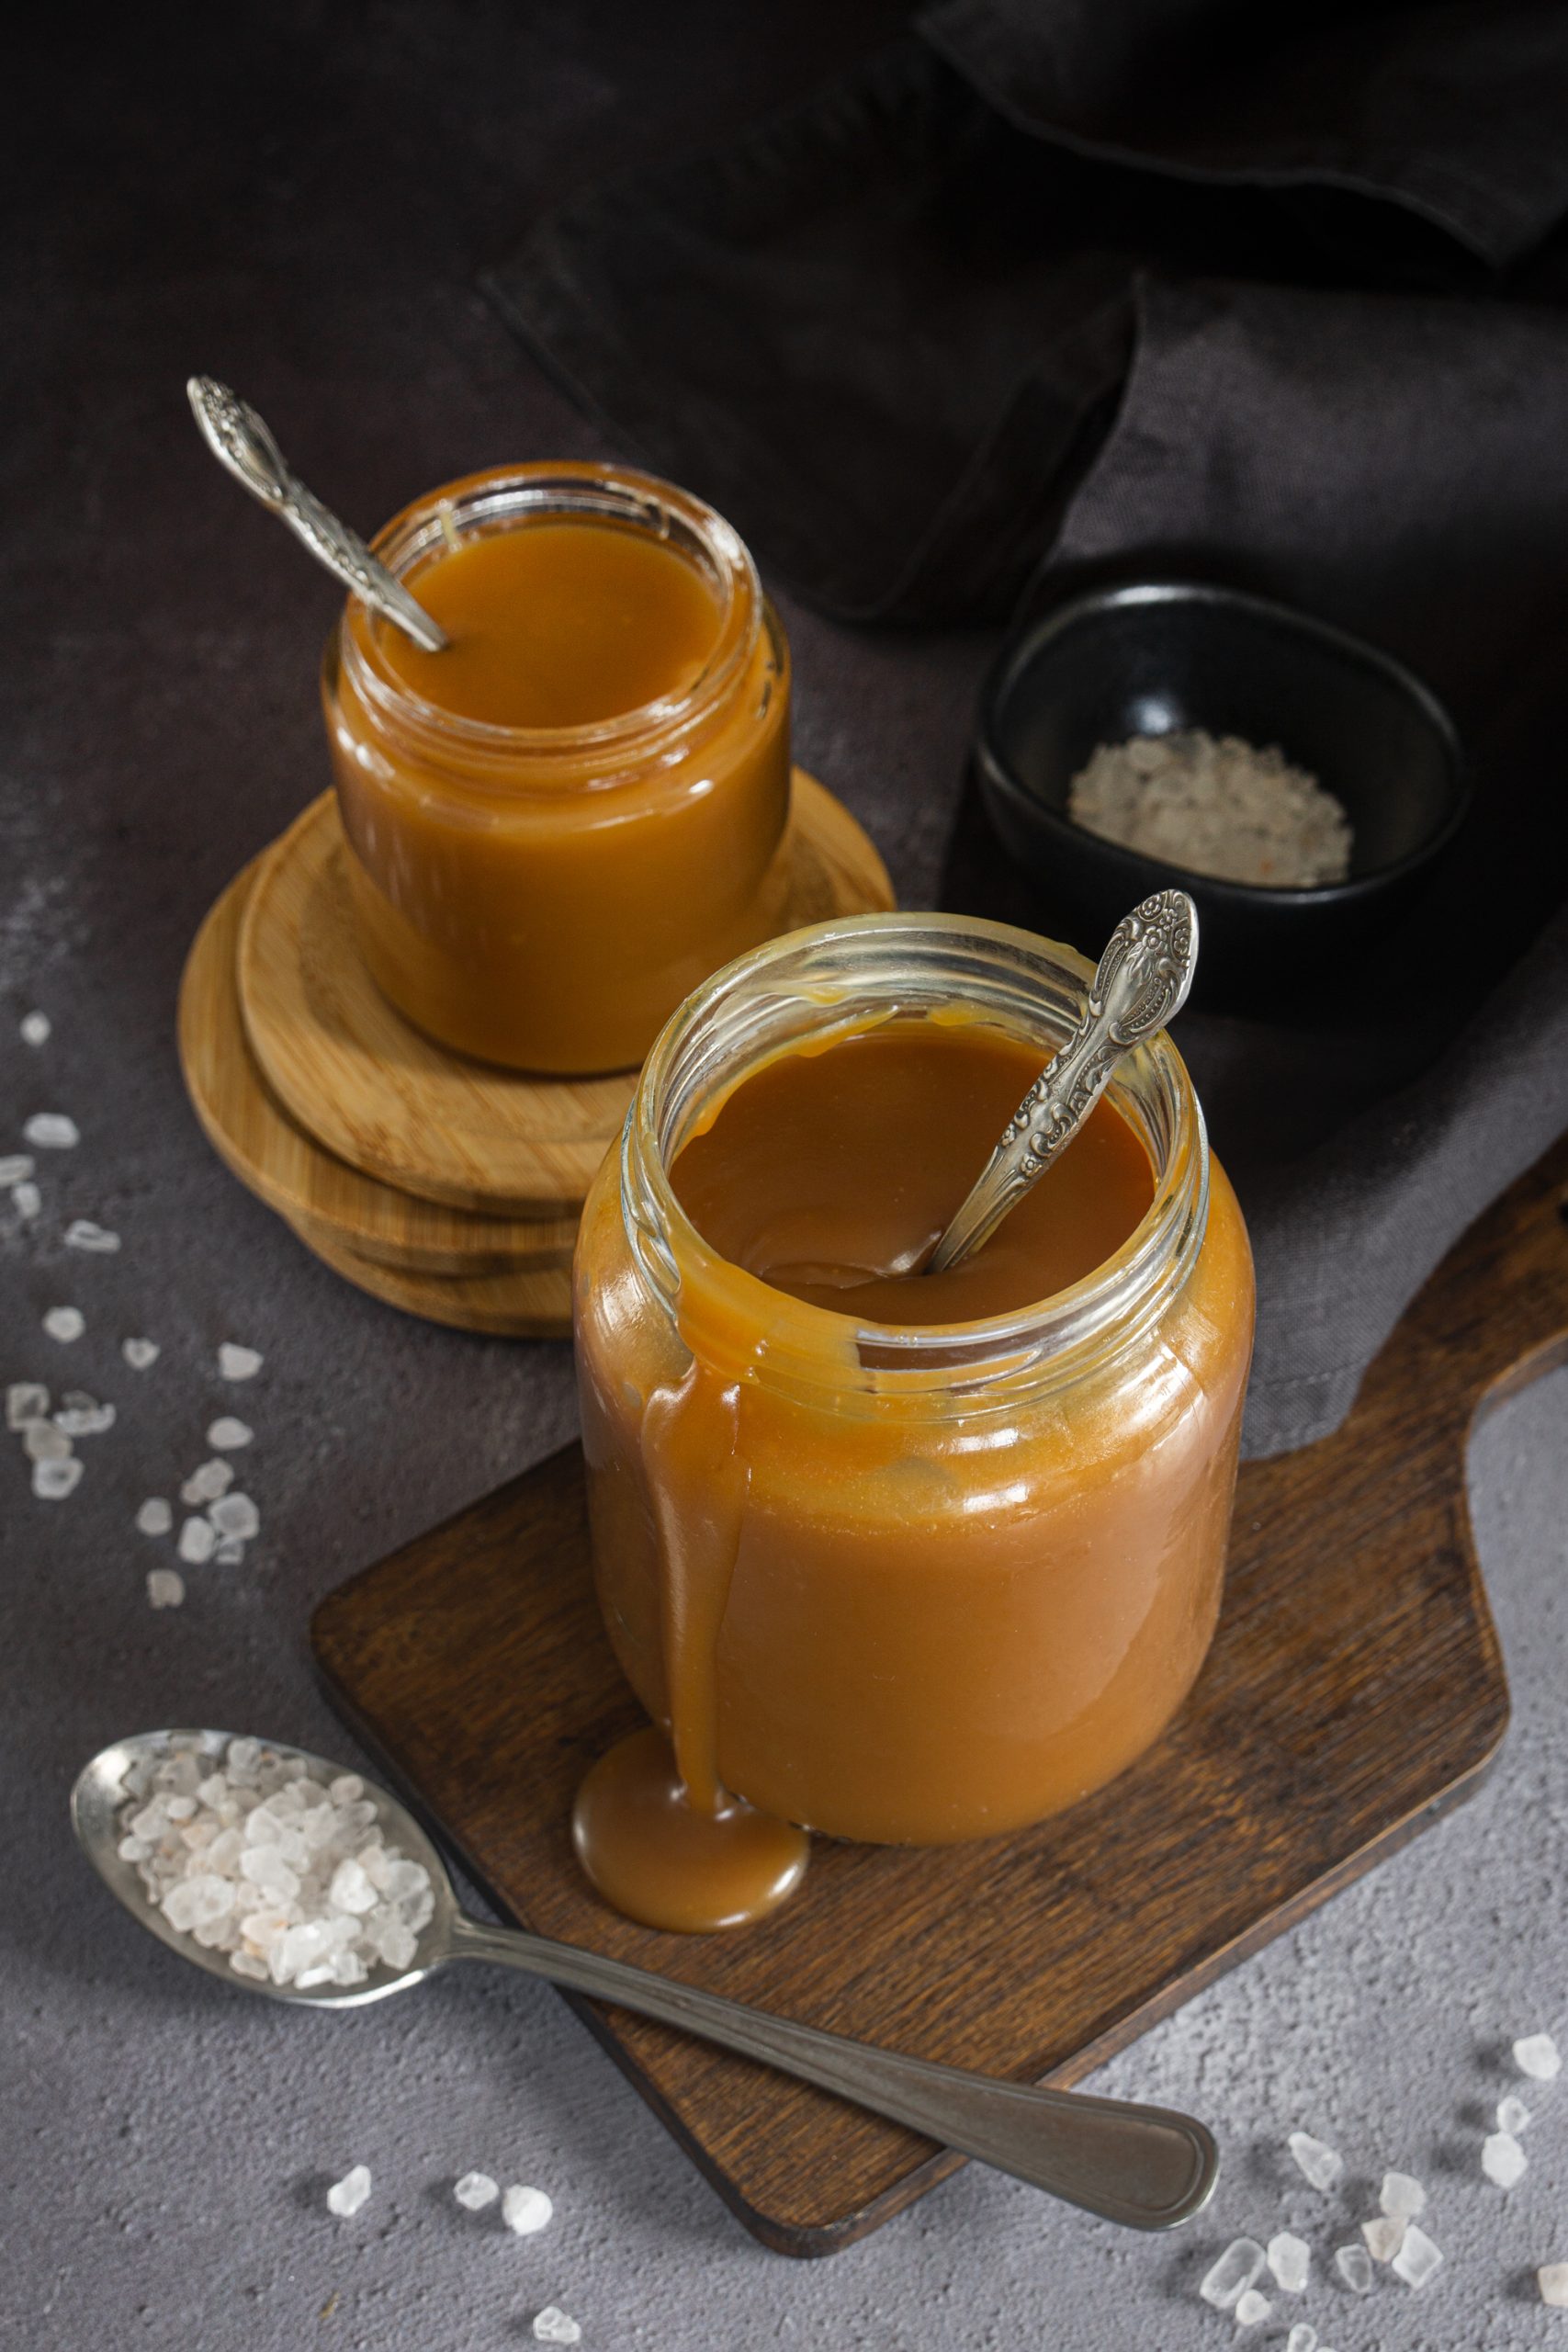 Two jars of salted caramel sauce